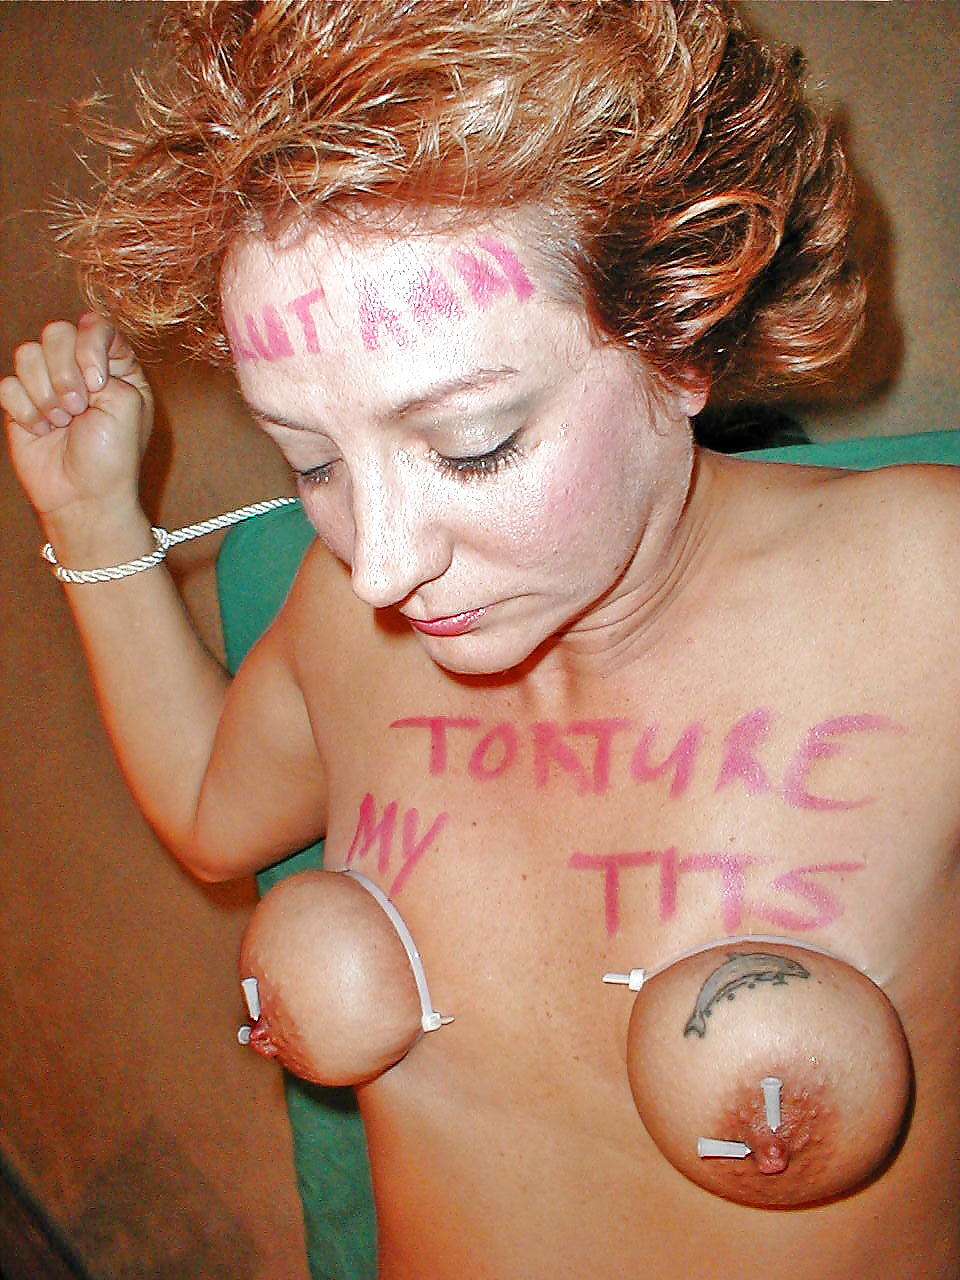 Writing Slut Ann - what would you write on her body #18750316